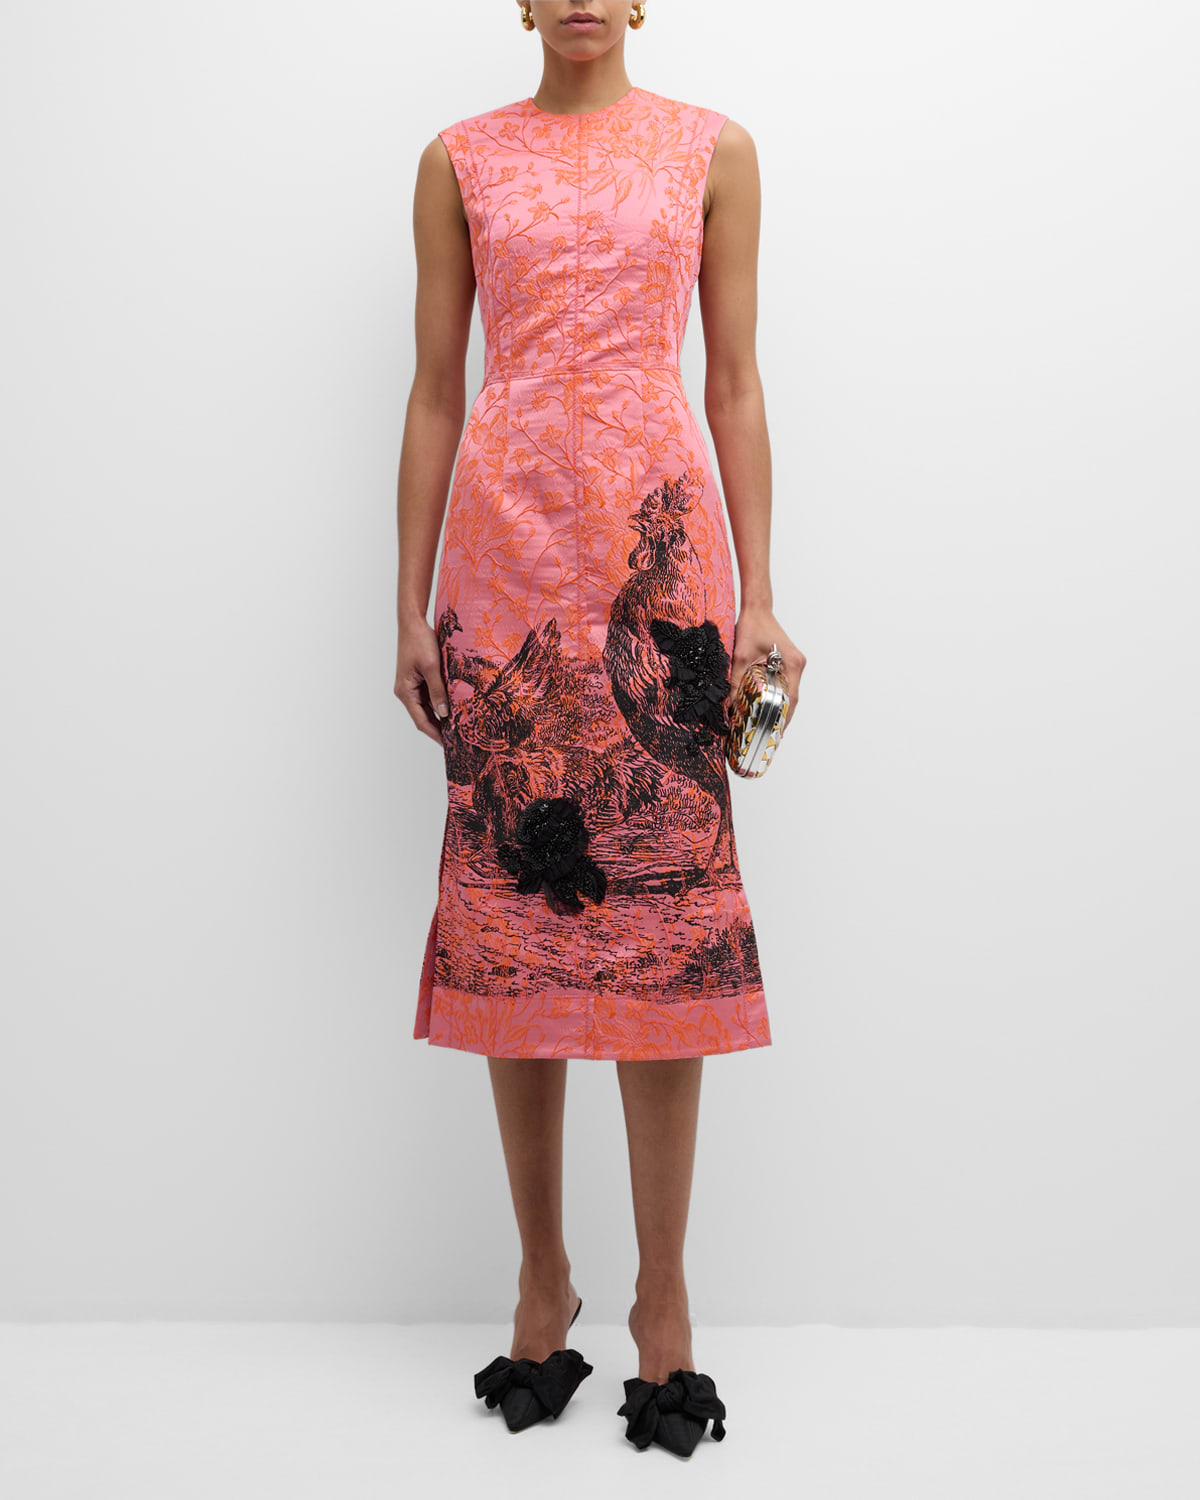 Sequined Chicken-Print Sleeveless Bow Floral Brocade Midi Dress